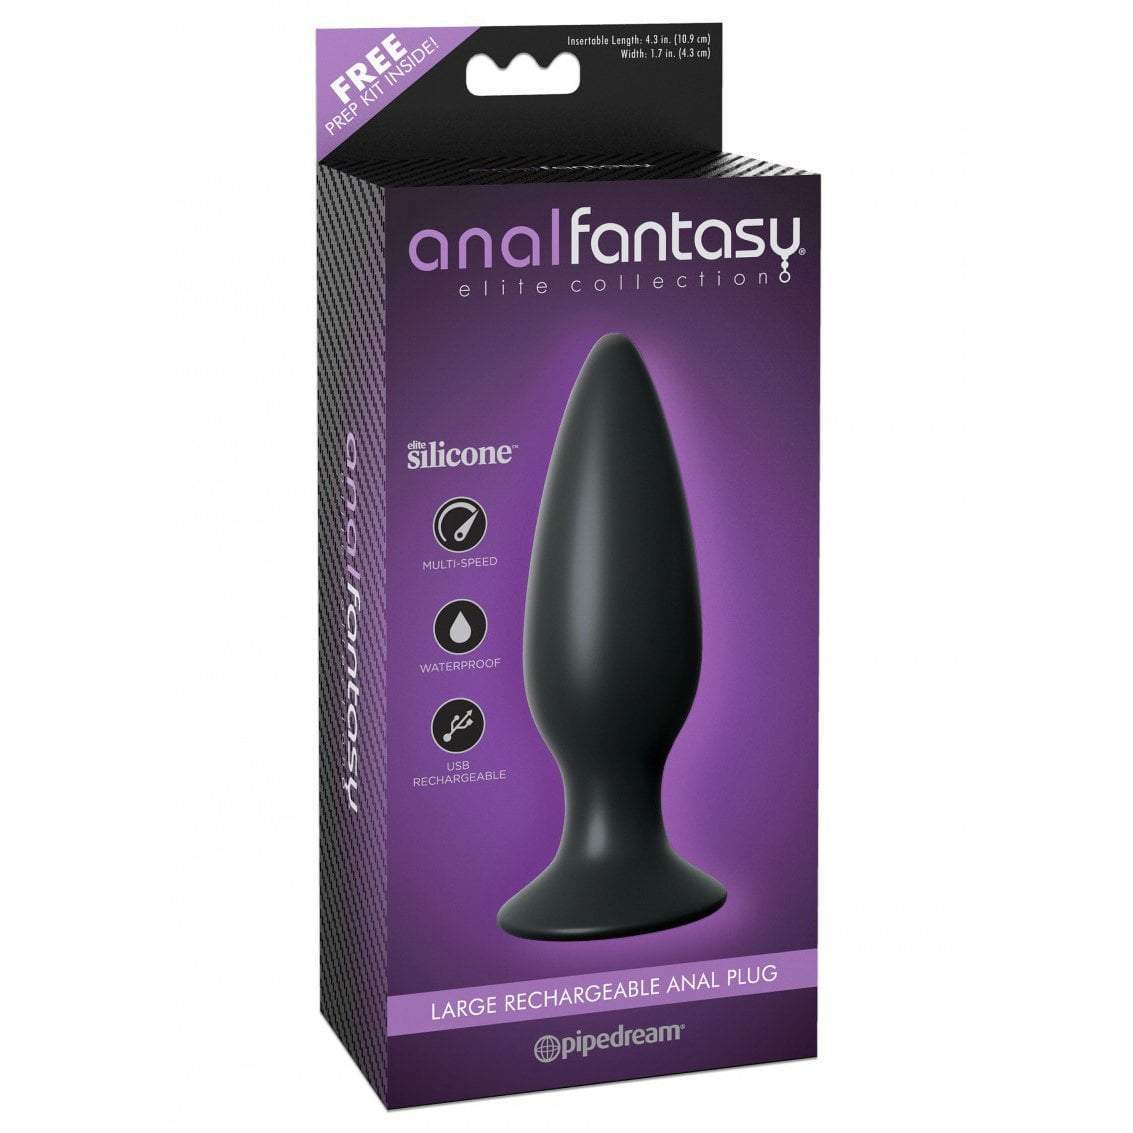 Pipedream - Anal Fantasy Elite Collection Rechargeable Anal Plug Large (Black) Anal Beads (Vibration) Rechargeable